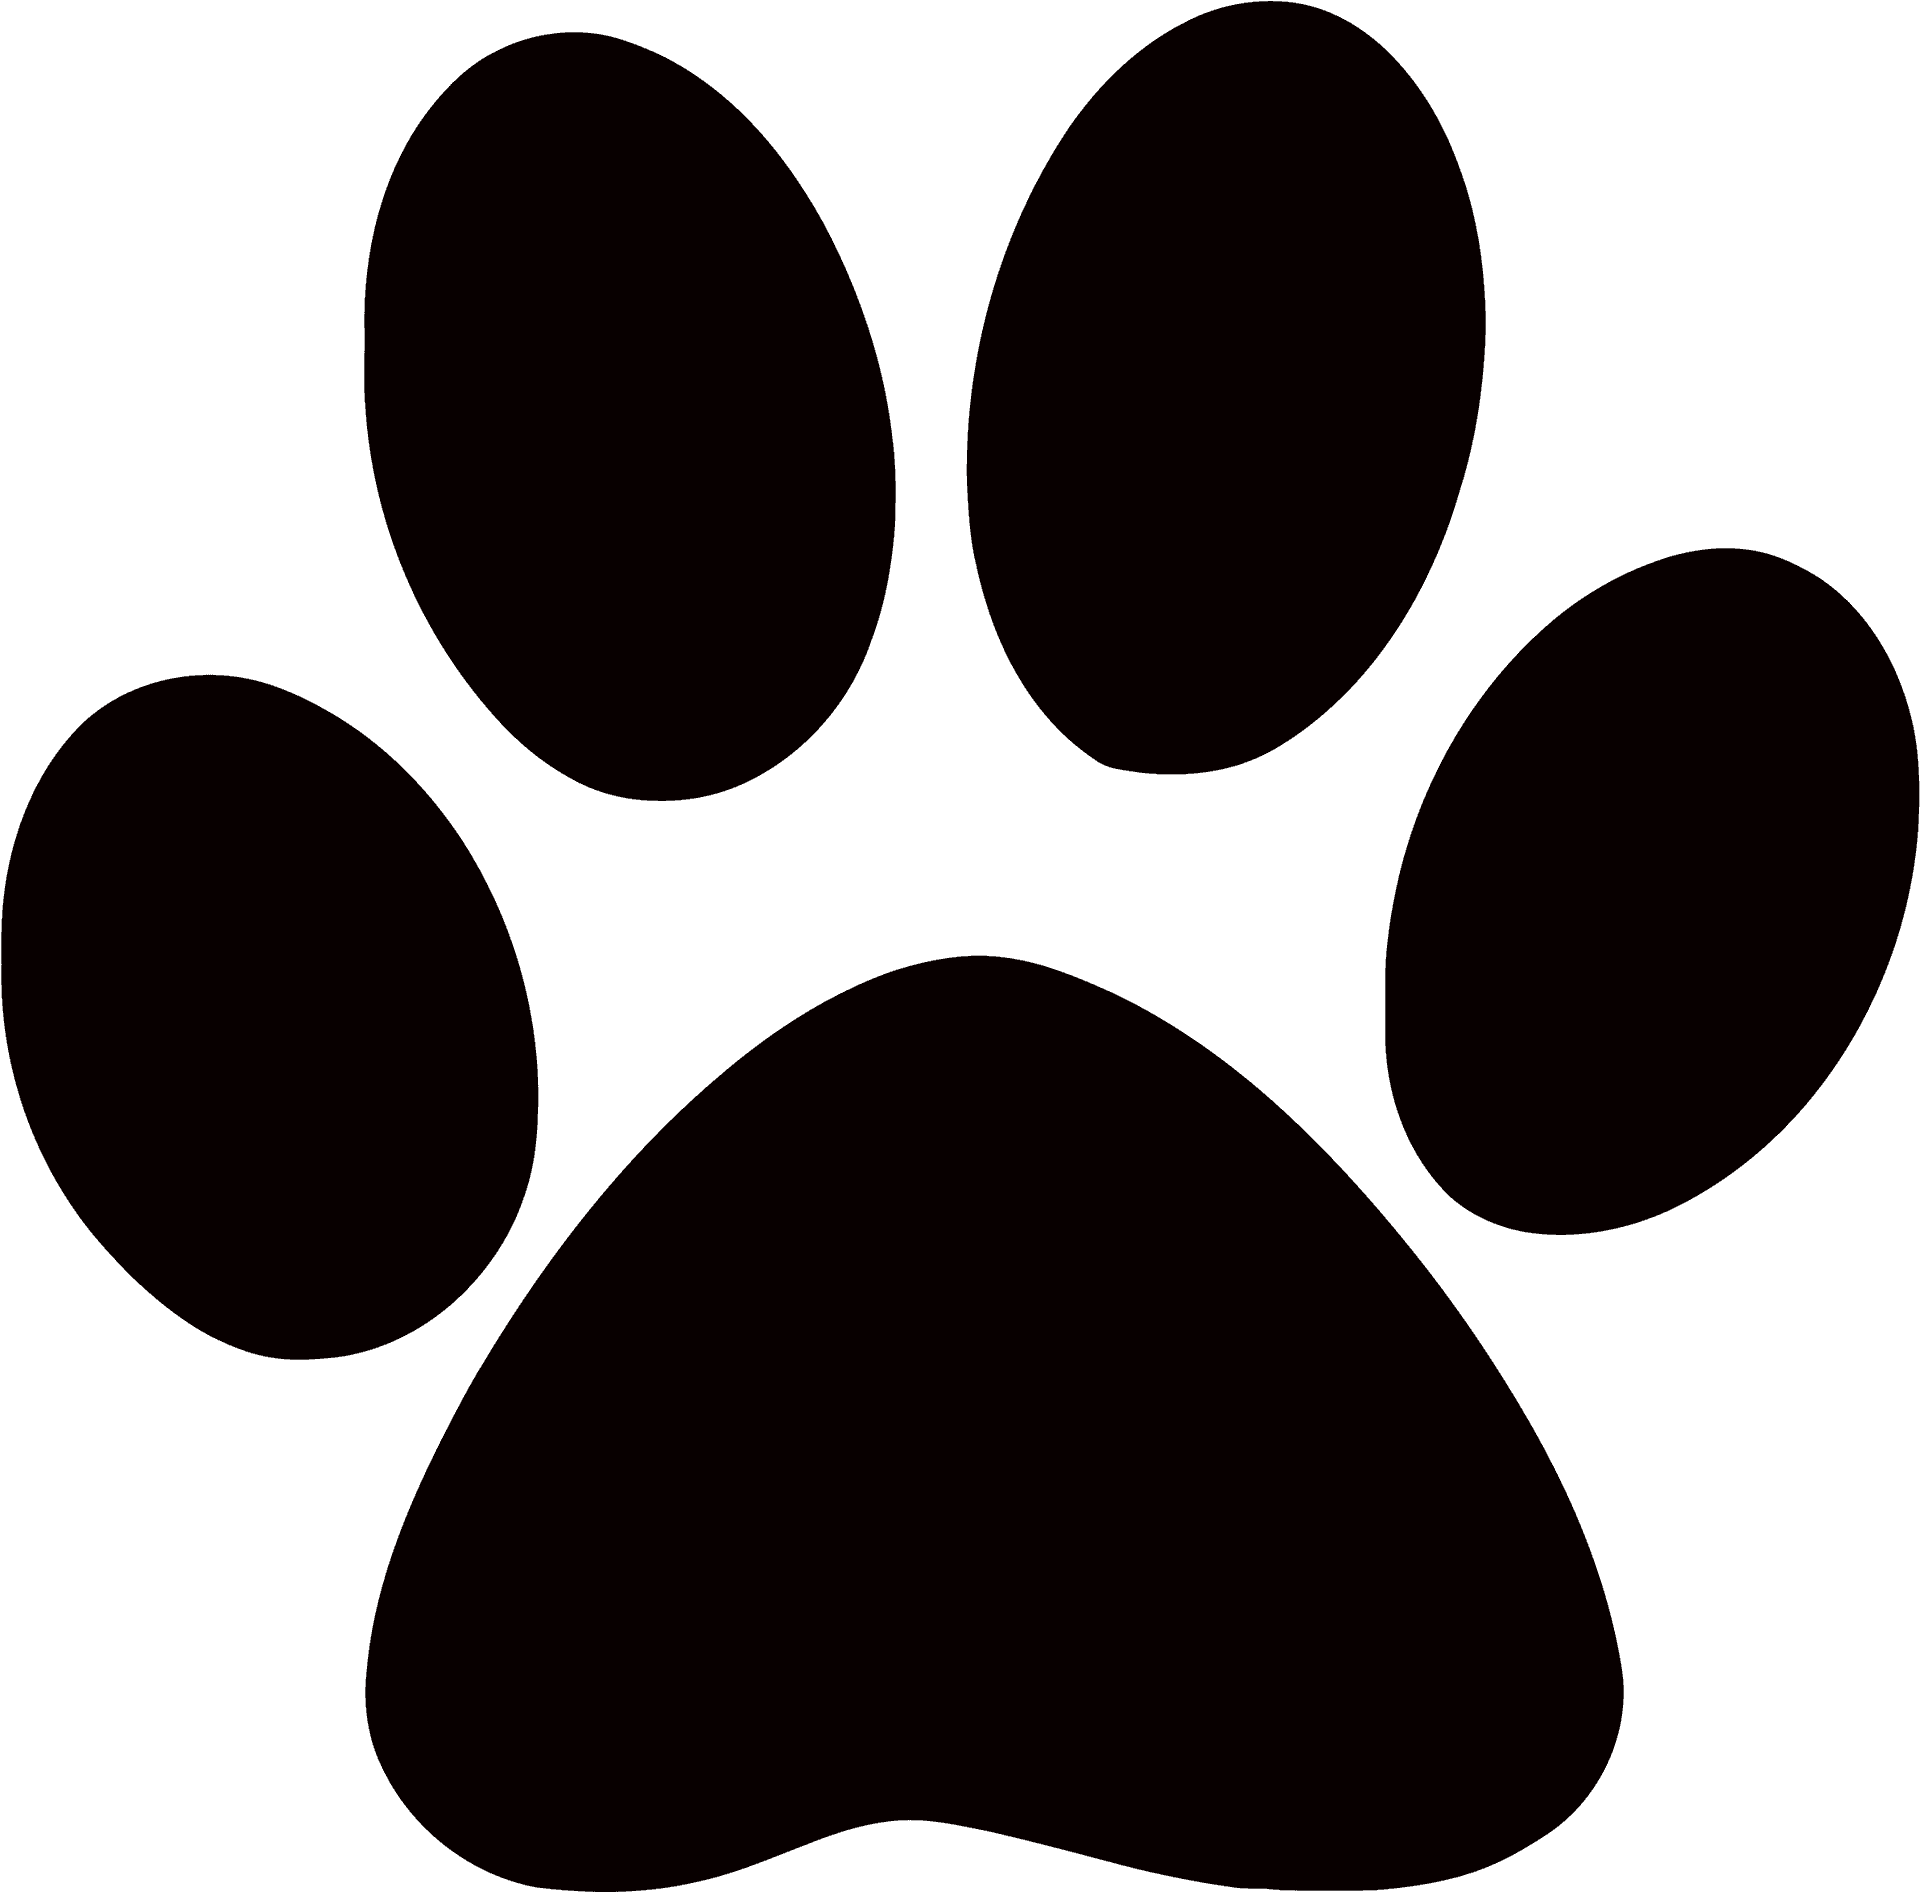 Paw Print Silhouette Graphic PNG image